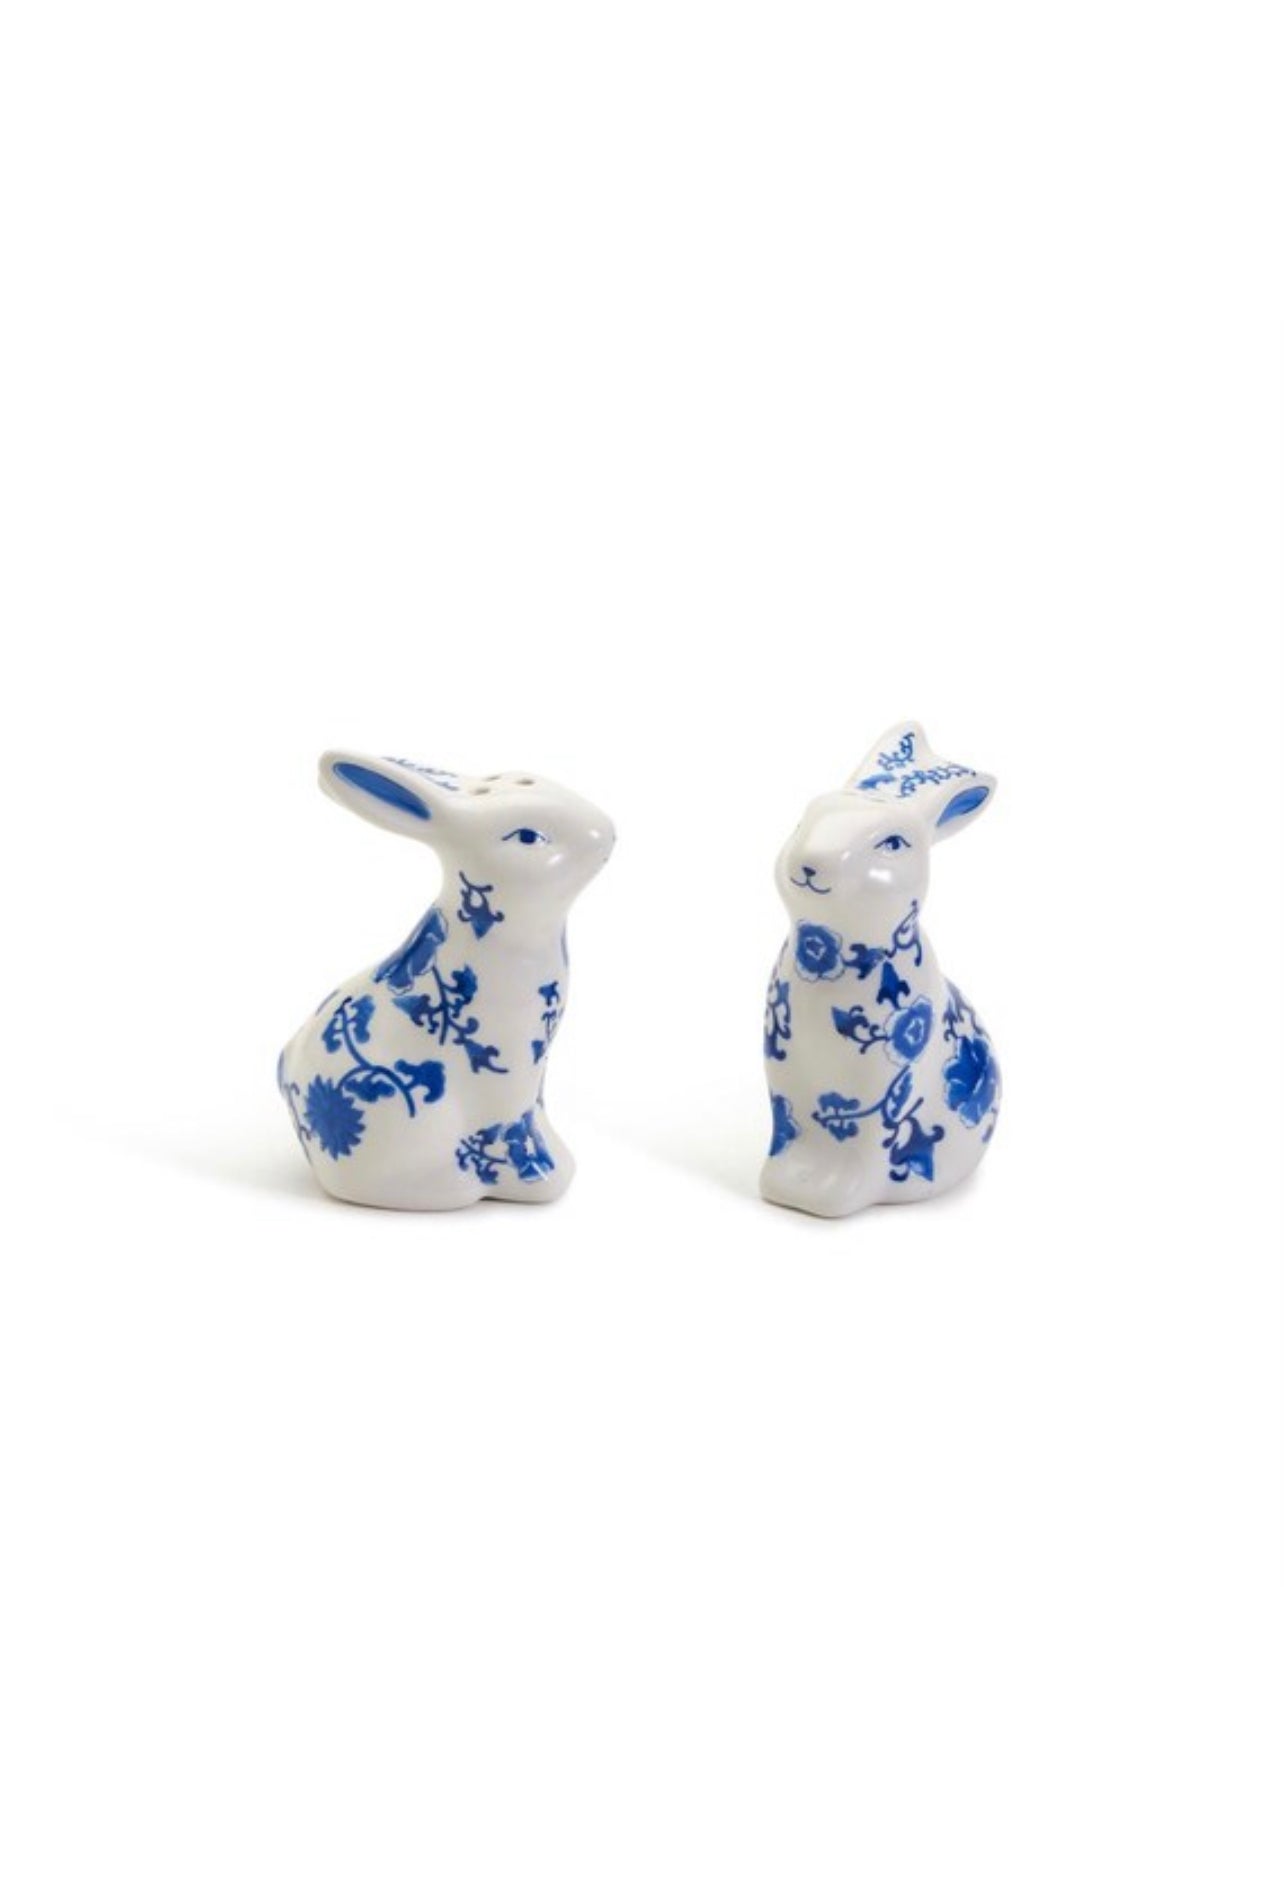 Blue and white chinoiserie bunny salt and pepper shakers